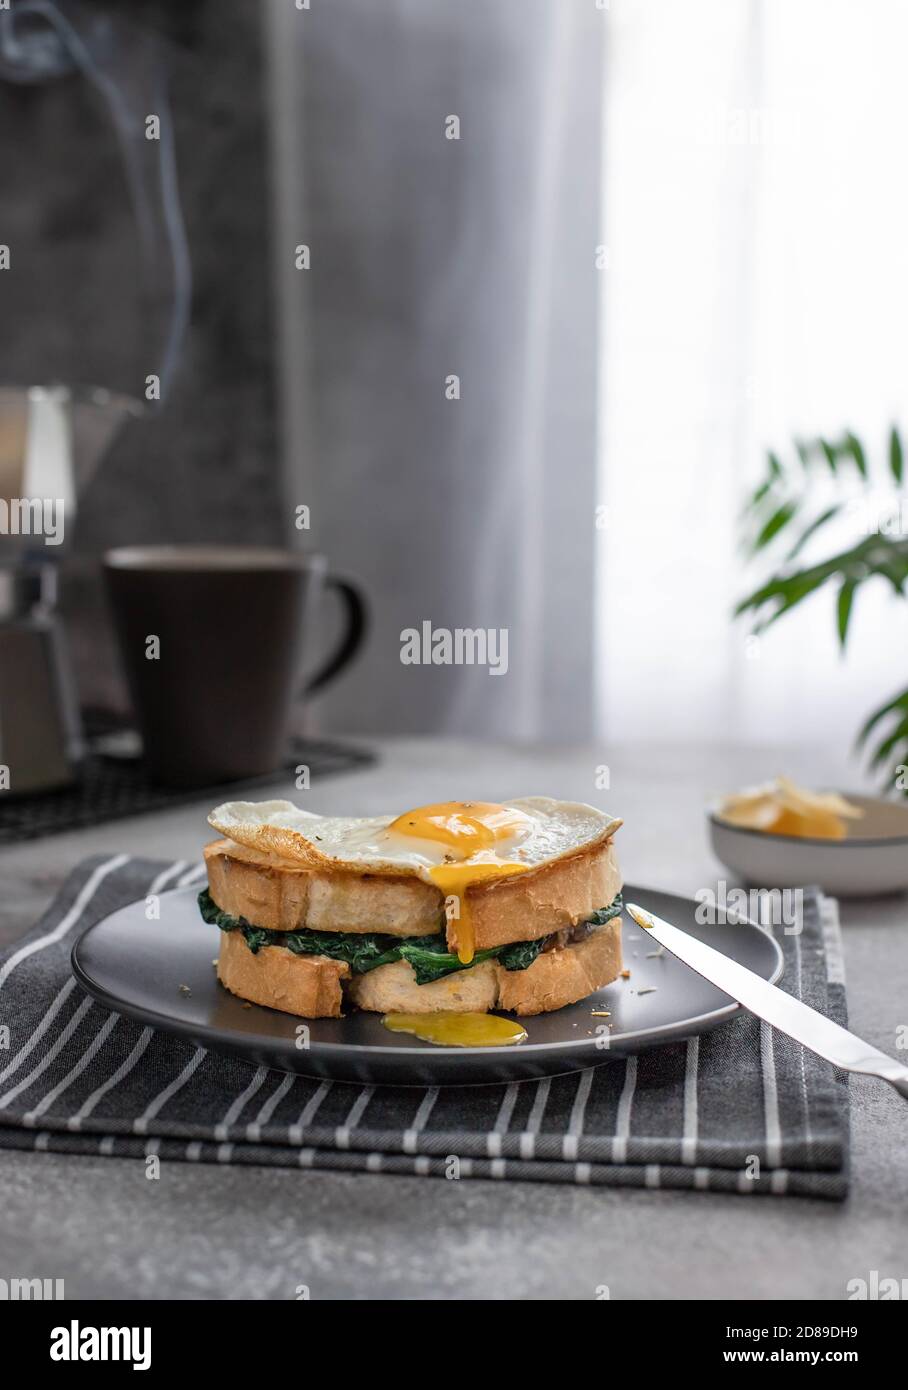 a sandwich with a yolk flowing from a fried egg. Delicious breakfast sandwich with spinach and coffee maker with hot coffee. Stock Photo